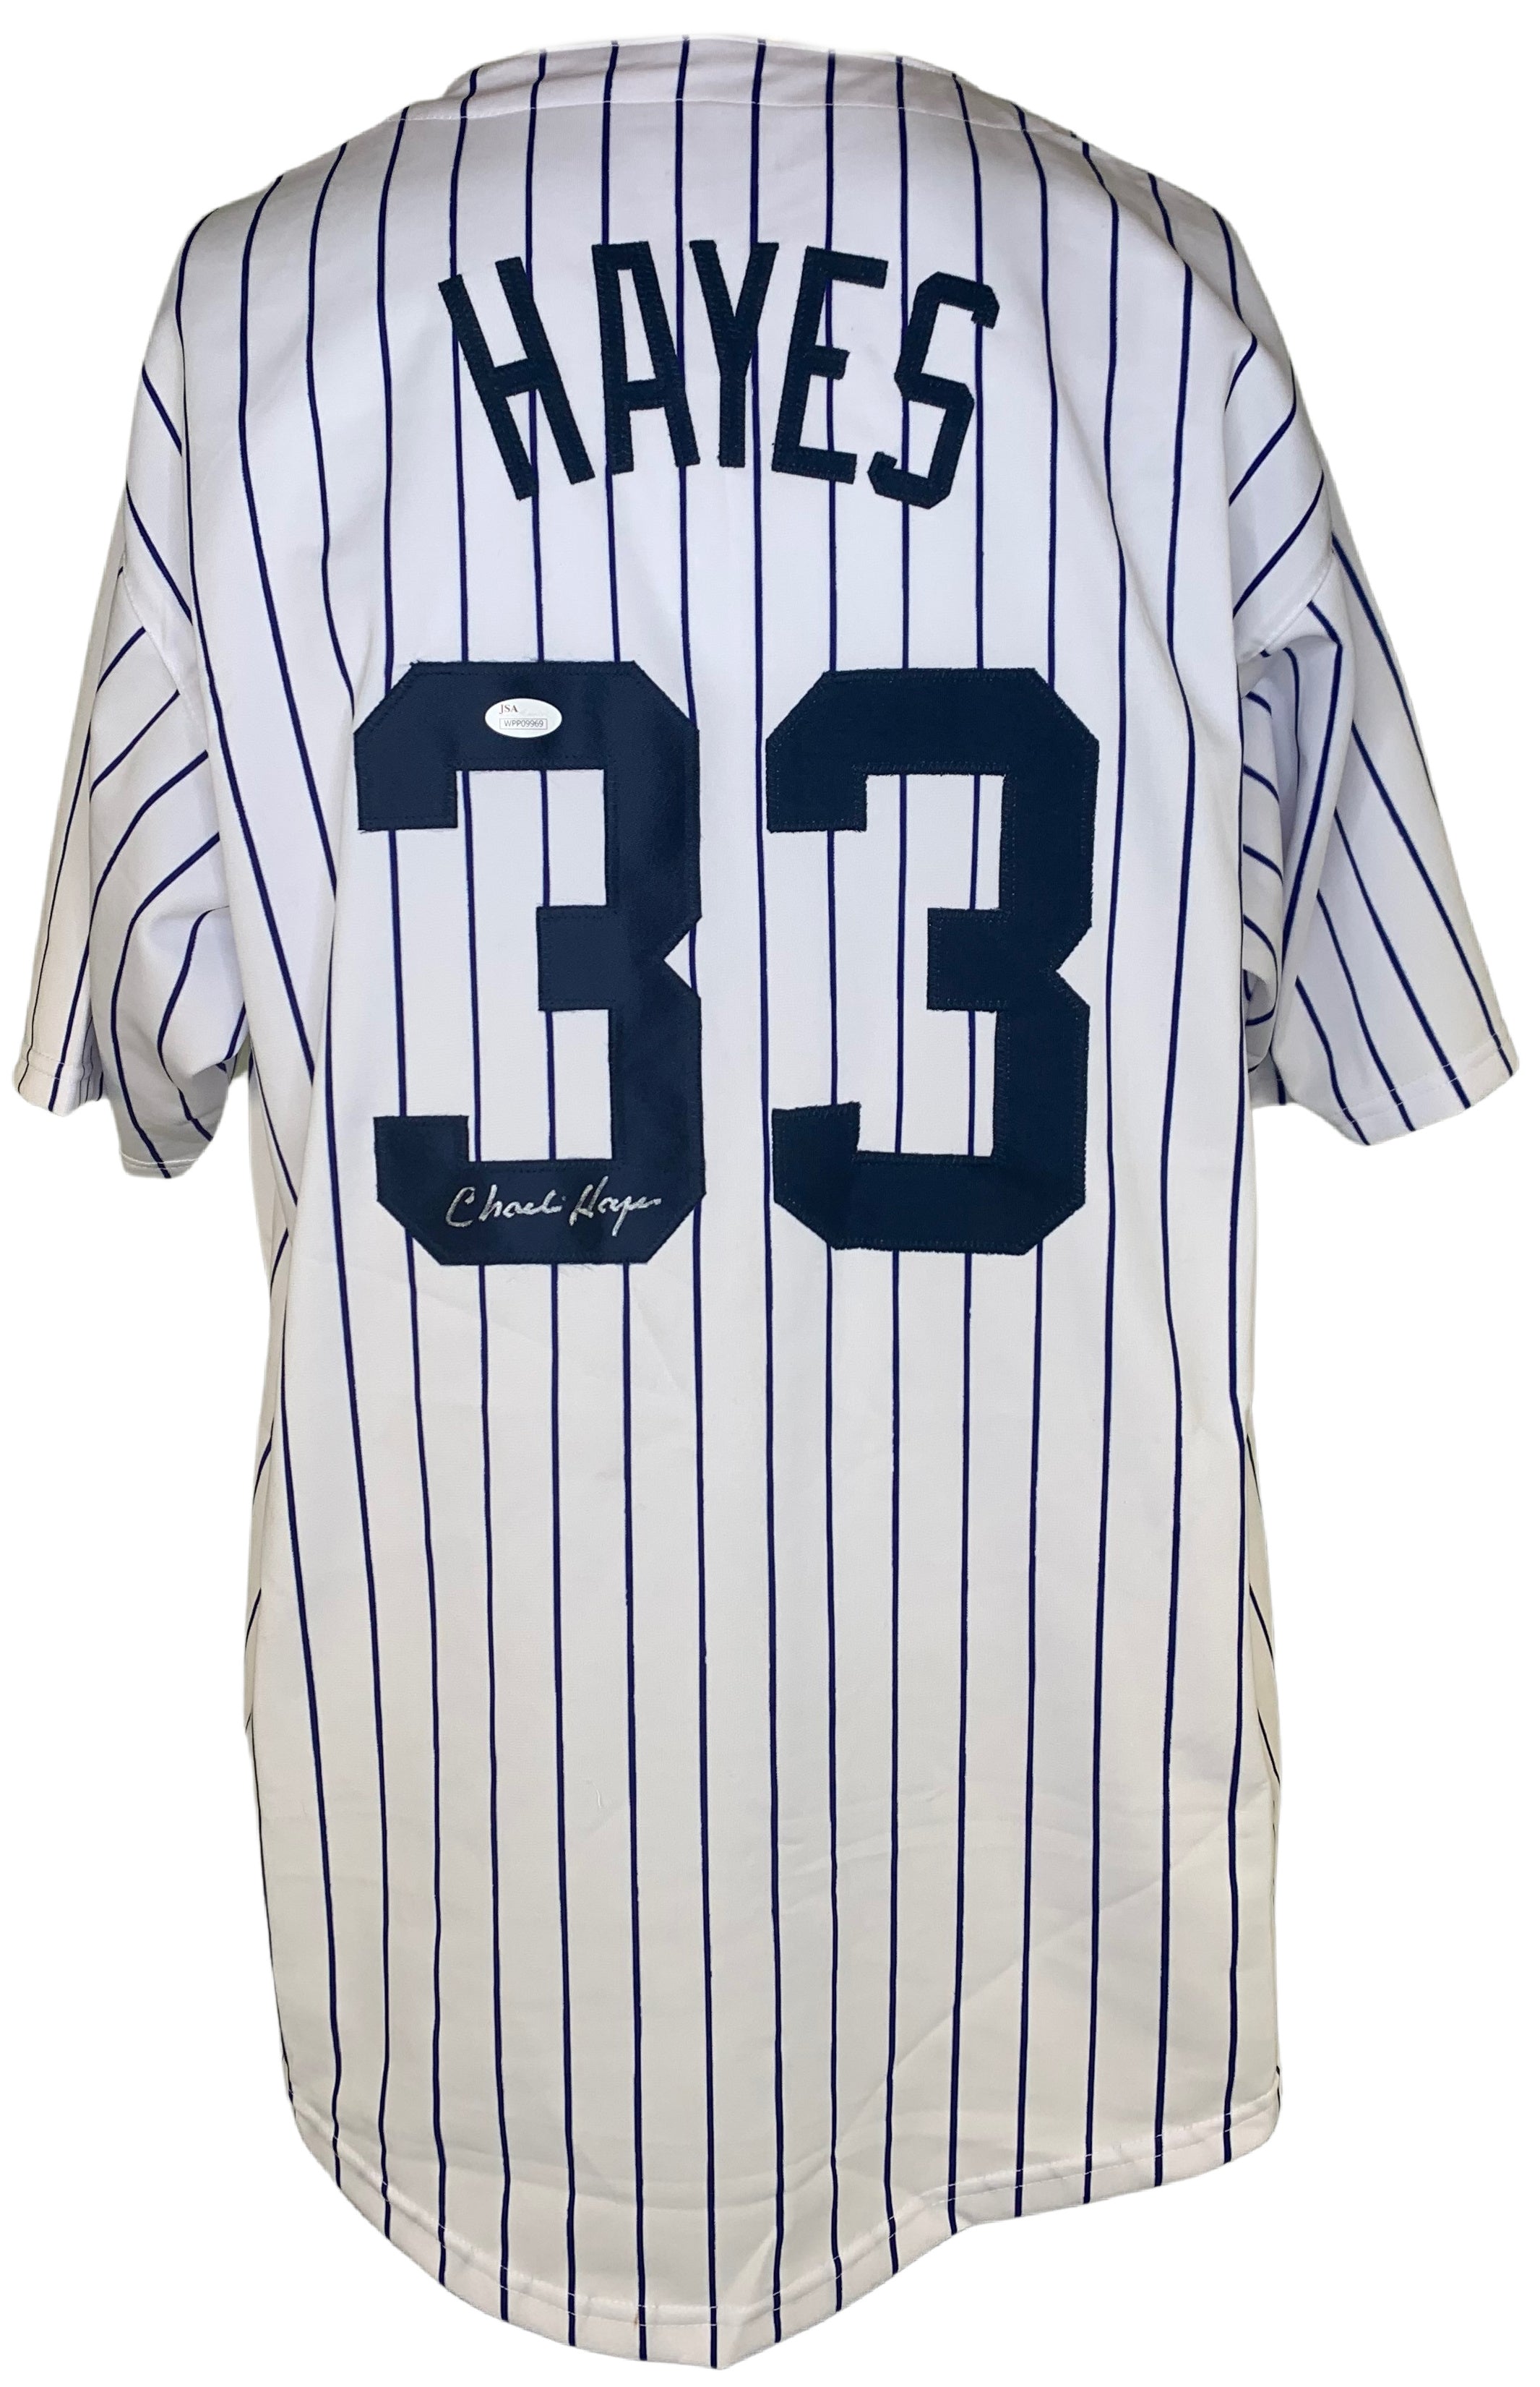 Charlie Hayes autographed signed jersey MLB New York Yankees JSA